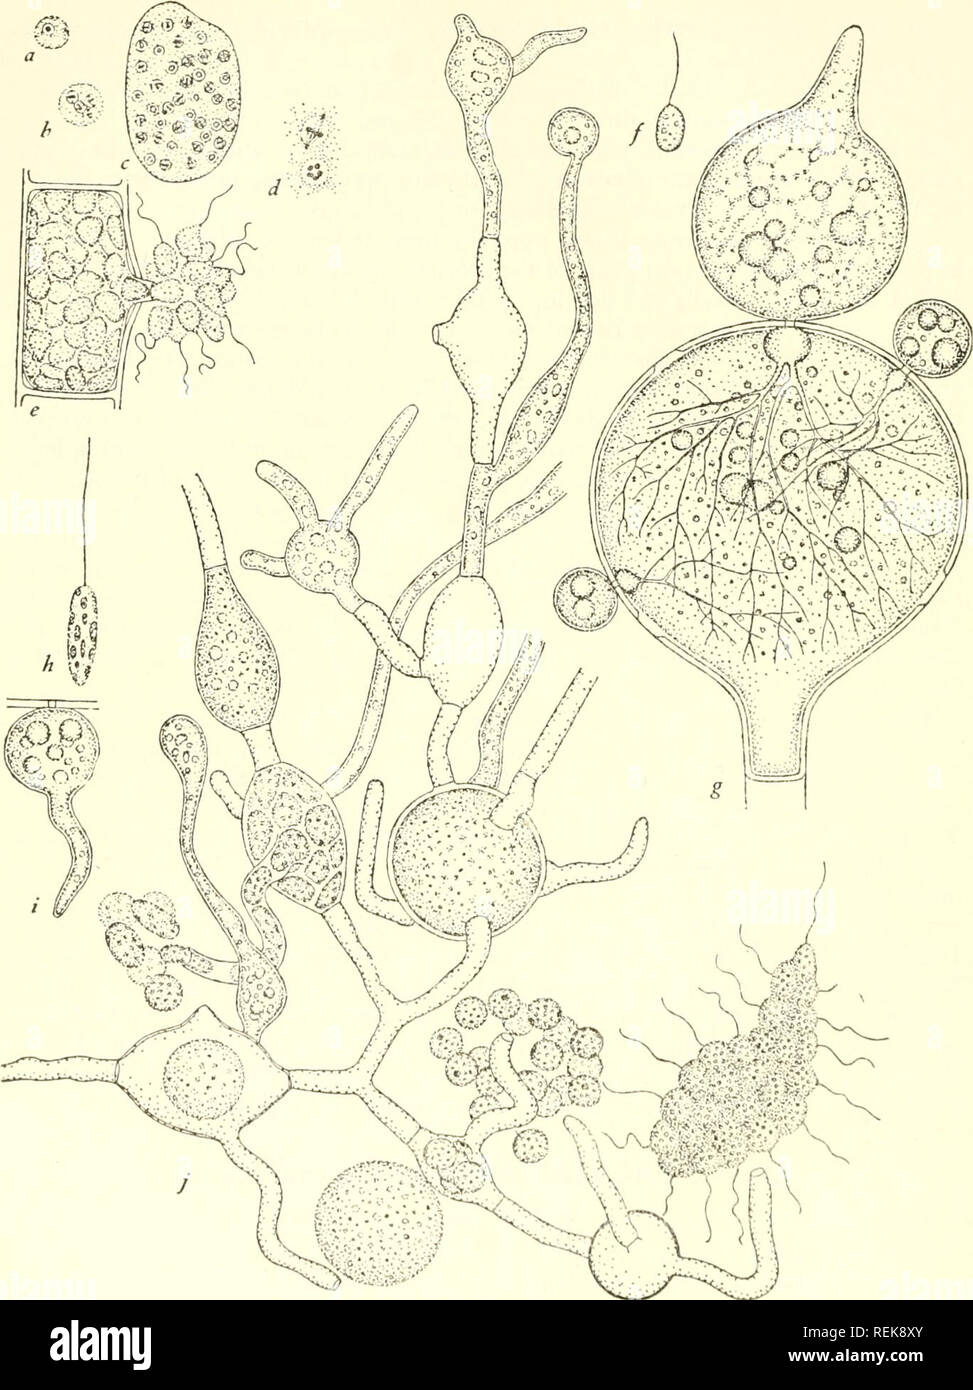 . The classification of lower organisms. Biology. 70] The Classification of Lower Organisms. Fig. 12.—Hyphochytrialea: a-e^ Anisolpidium Ectocarpii; a-c, individuals de- veloping in cells of Ectocarpus; d, mitotic figures x 2,000; e^ cell of Ectocarpus filled by a mature individual discharging spores, f, g, Rhizidiomyccs apuphysatus; f, zoo- spore; g, oogonium of Achlya parasitized by three individuals, h, i, j^ llyphochy- trium catenoides; h, zoospore; i, young individual; j, mature individual with fila- ments, sporangia, and zoospores in various stages of development. All after Karling (1943 Stock Photo